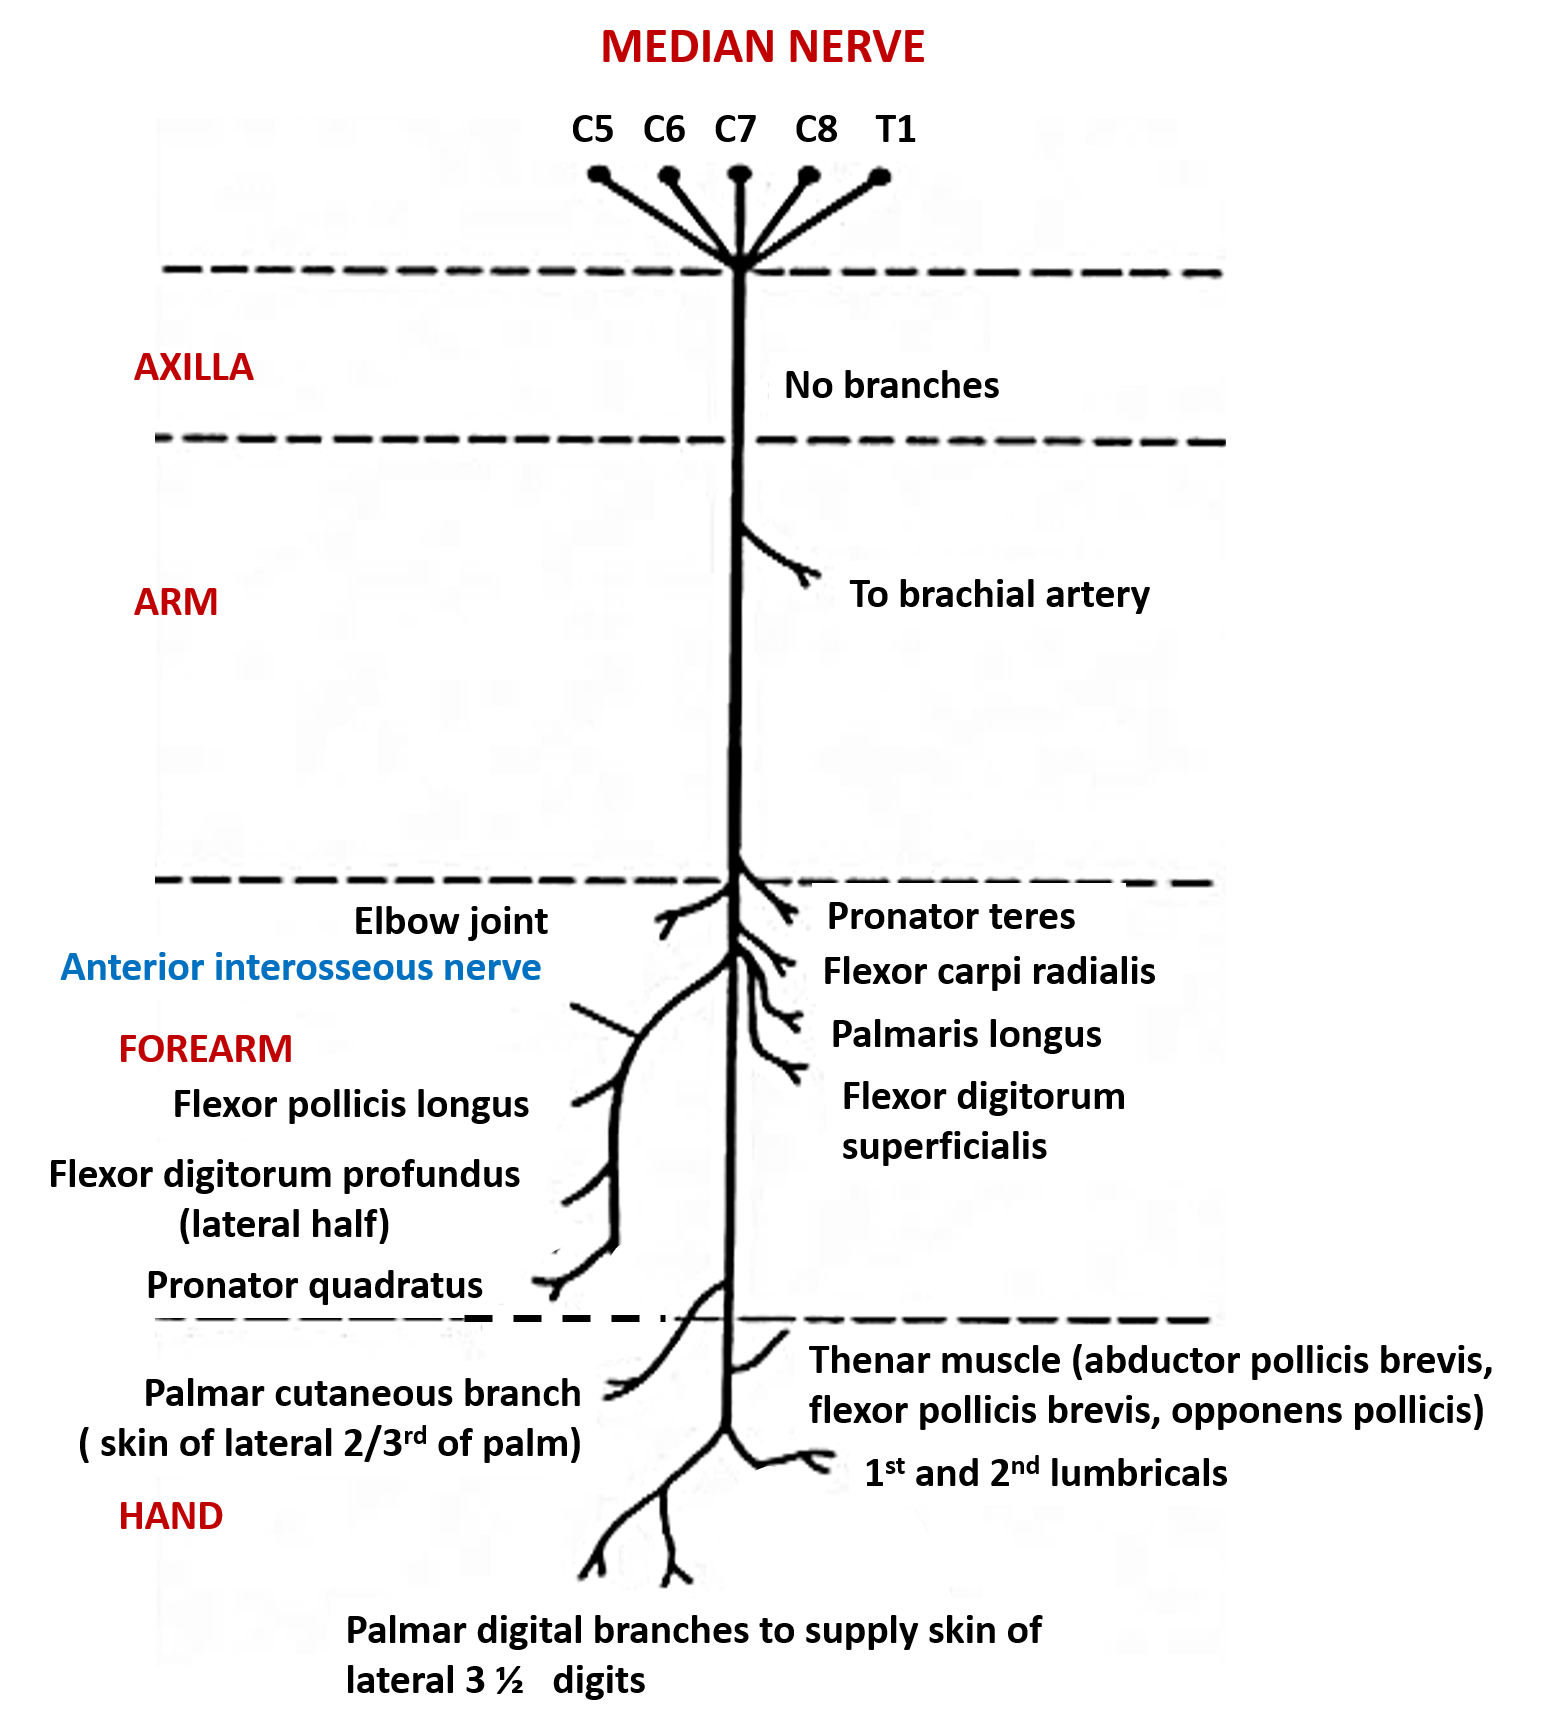 median nerve- branches and structures supplied by them